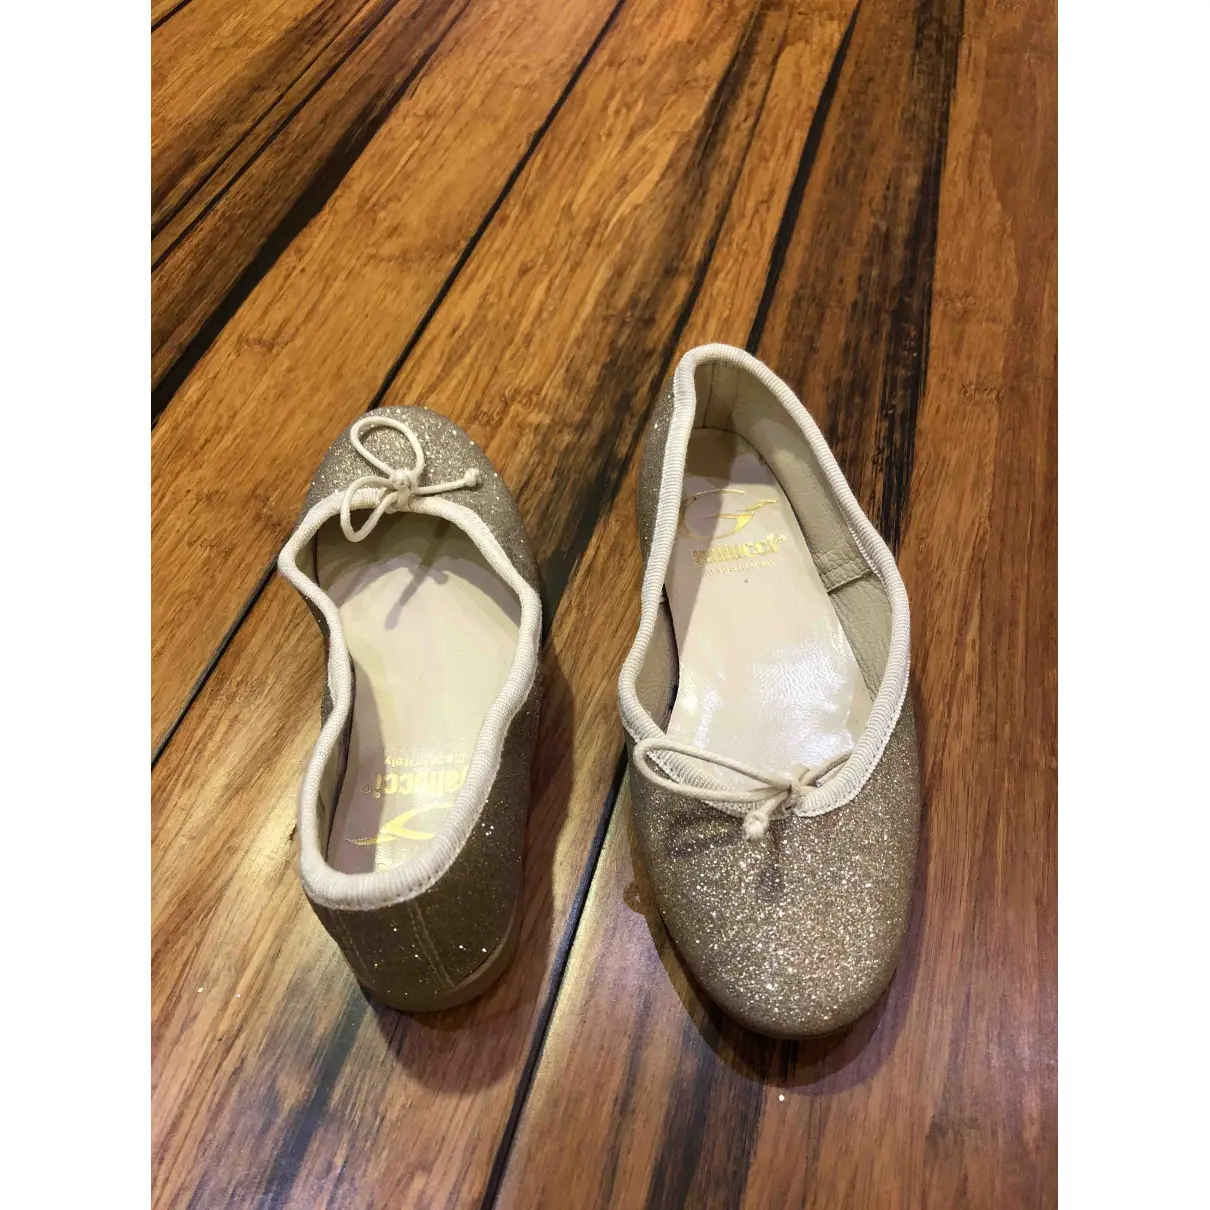 Buy Gallucci Leather ballet flats online